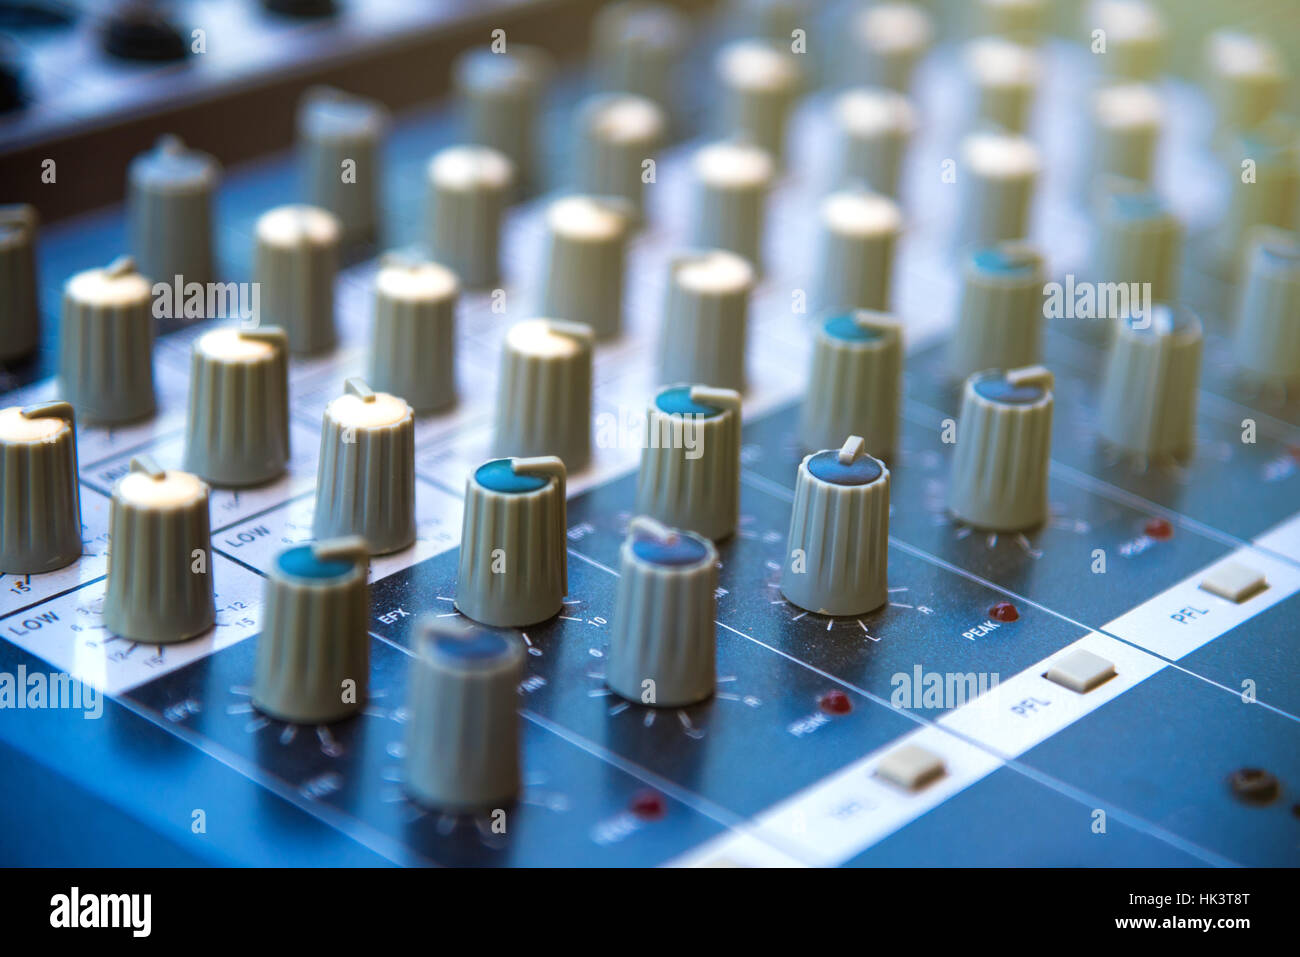 Audio sound mixer khob button board panel&amplifier equipment, sound mixing&engineering concept, selective focus, 45 degree angle view. Stock Photo